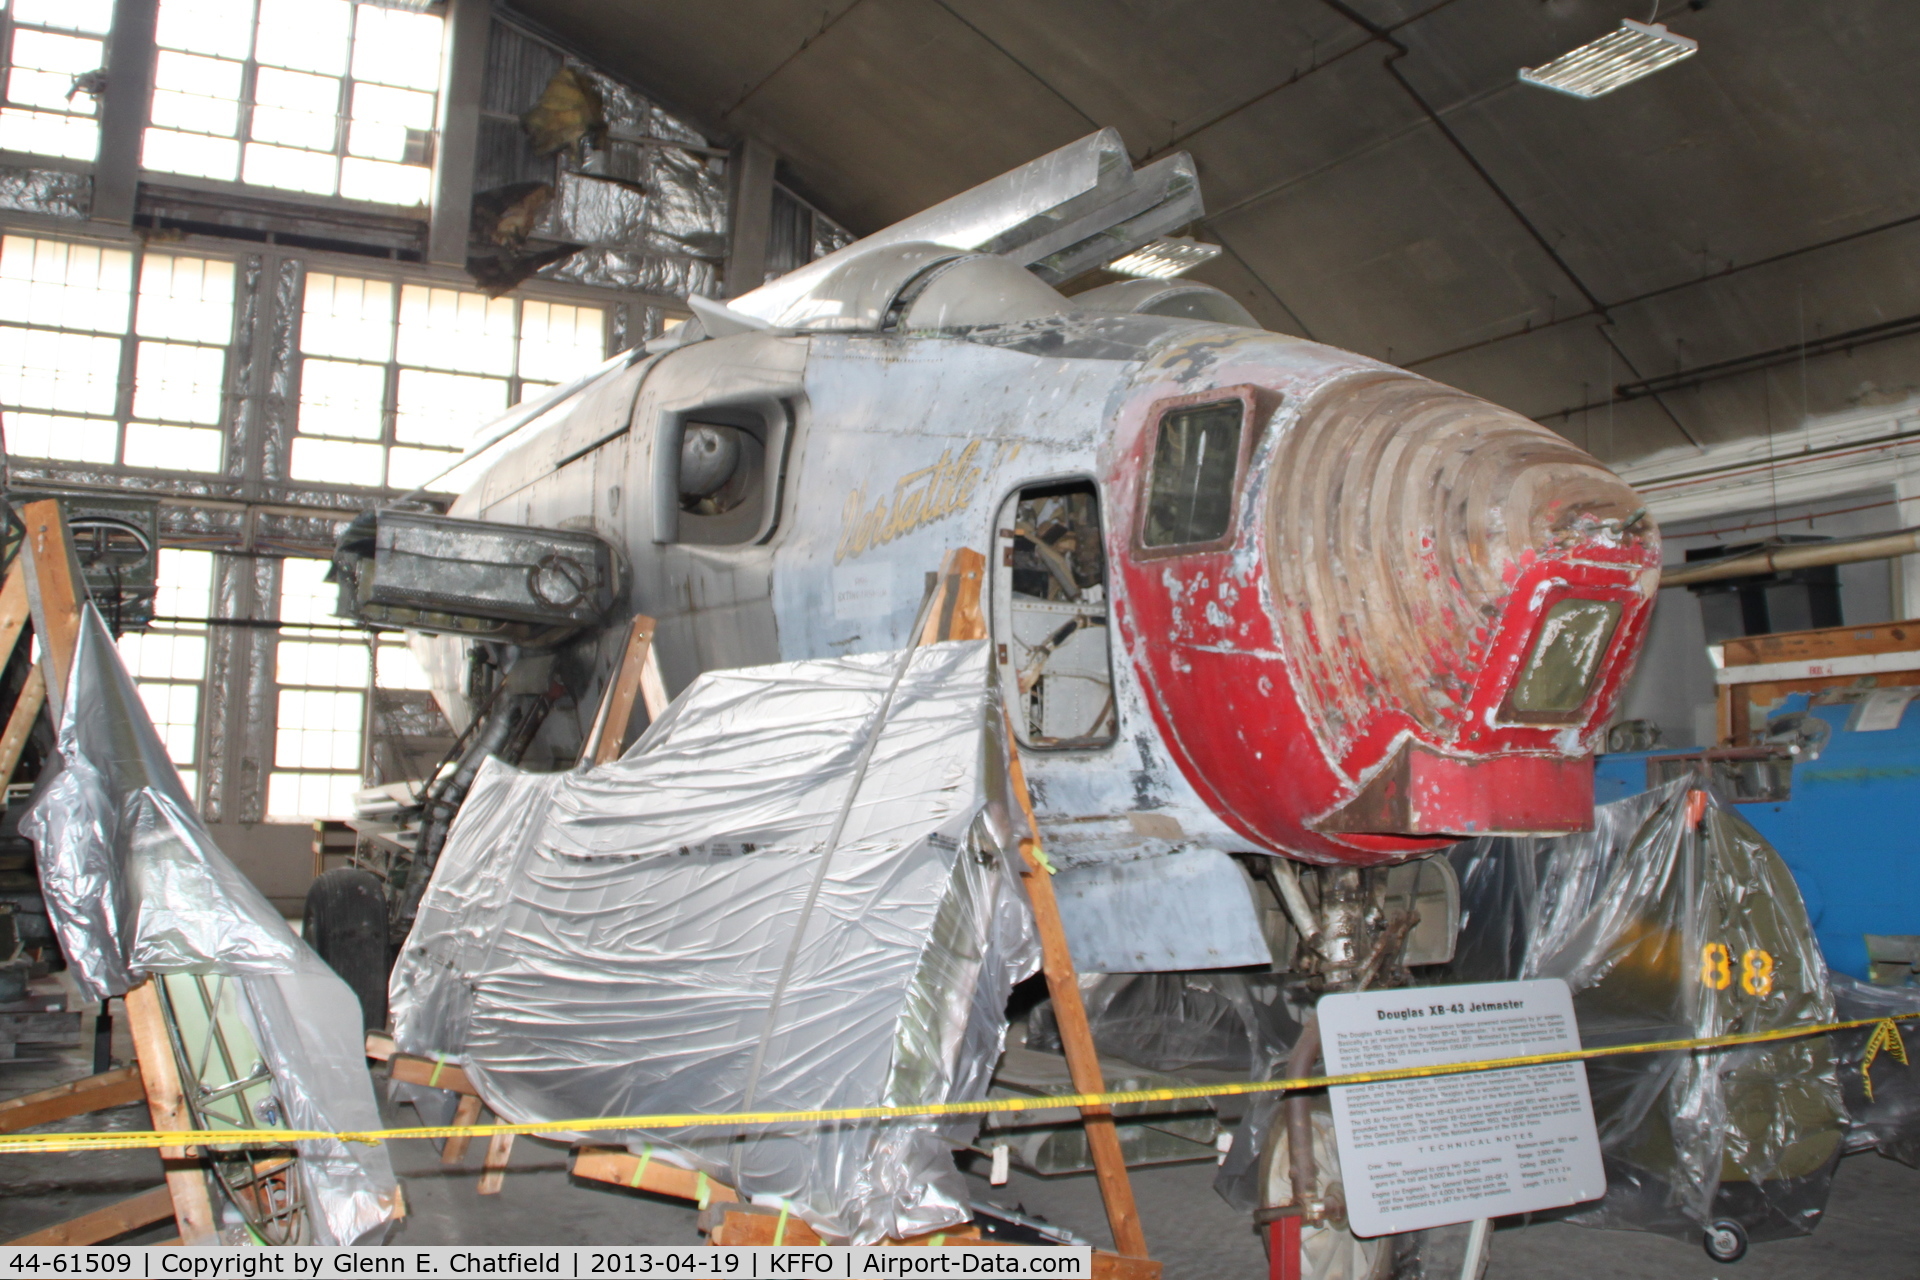 44-61509, 1946 Douglas XB-43 C/N Not found 44-61509, In the restoration facility